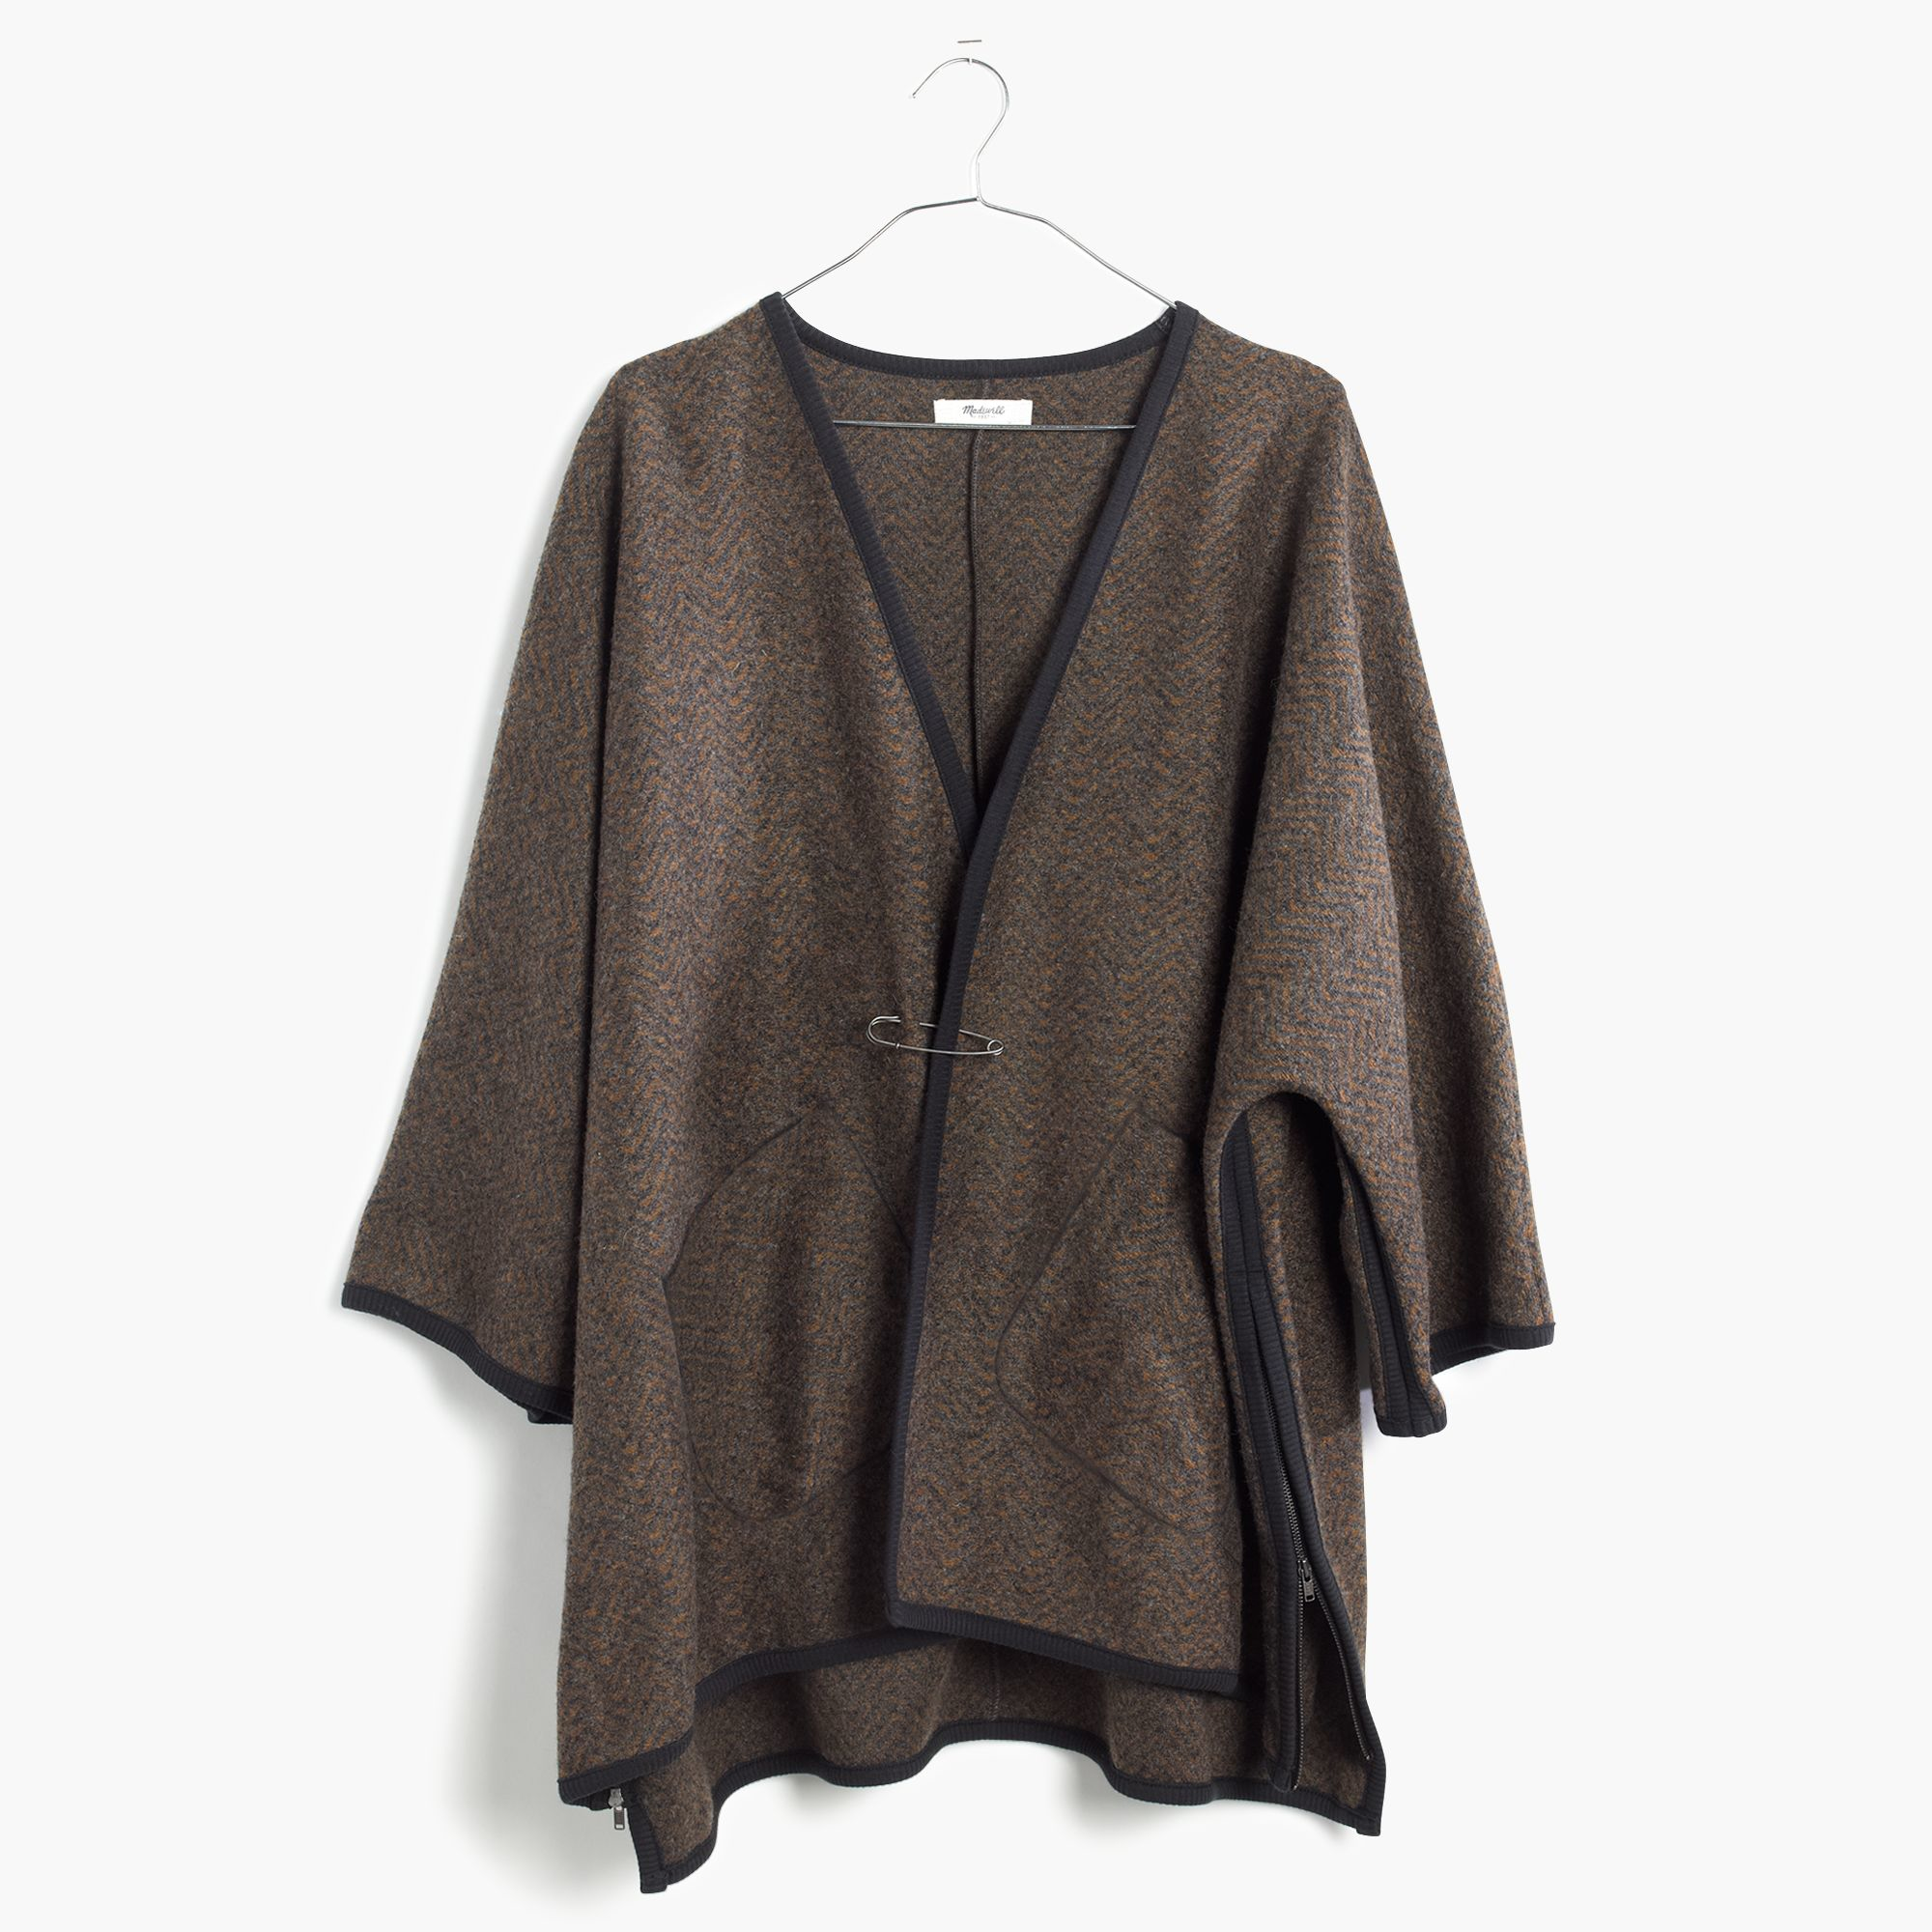 Lyst - Madewell Side-zip Poncho Coat in Natural